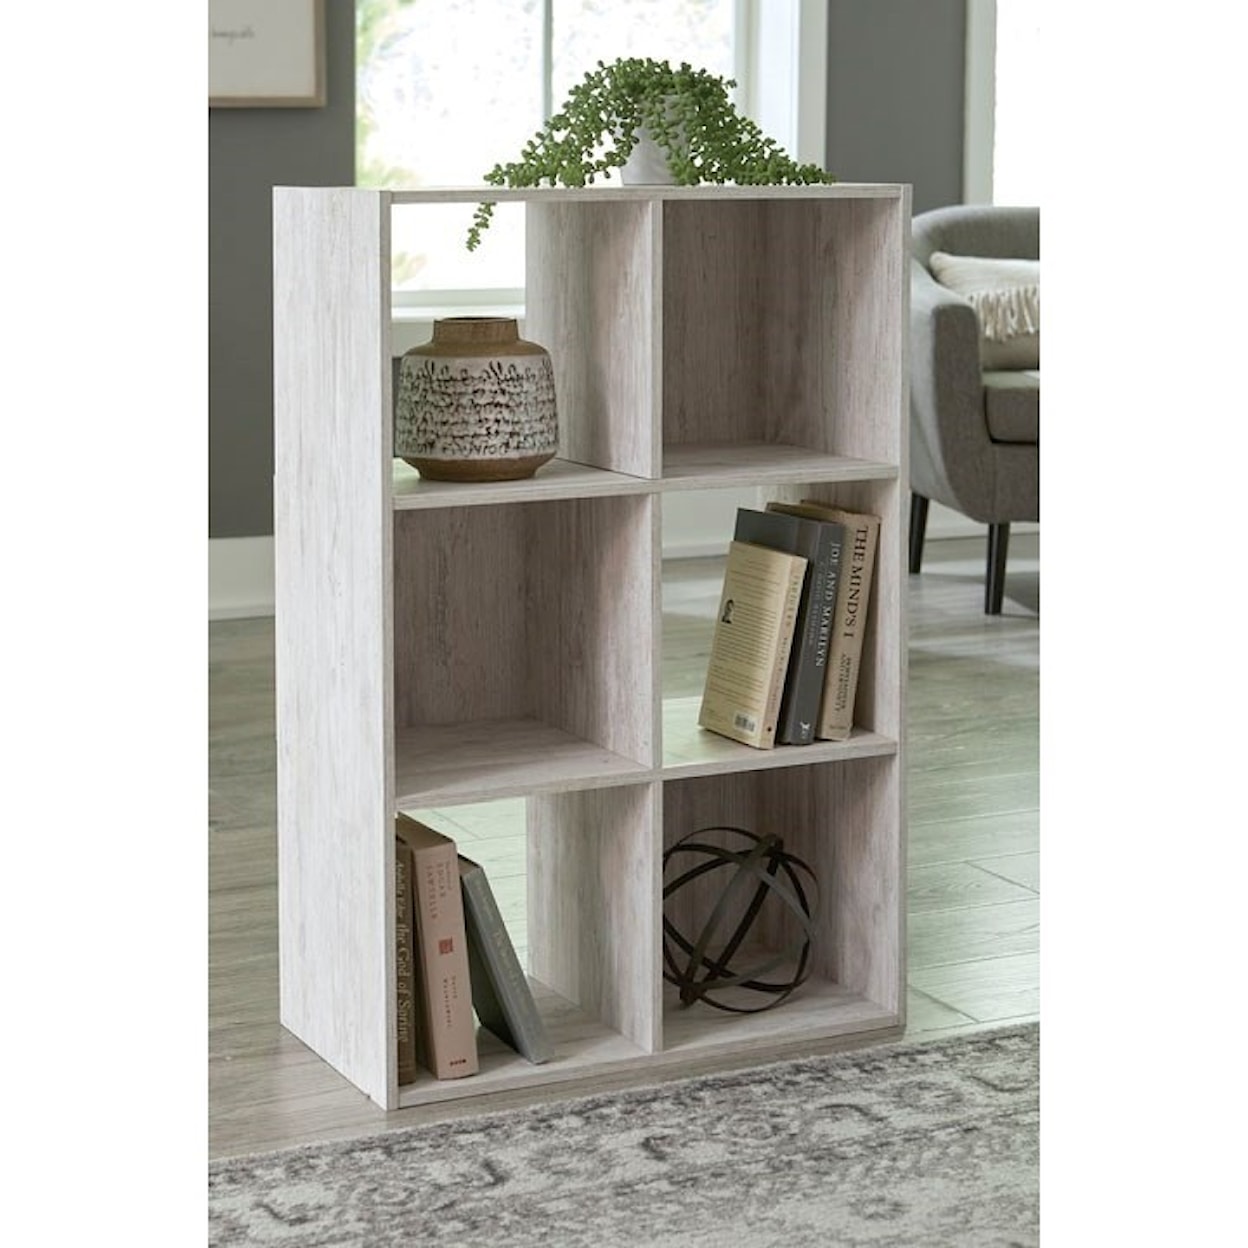 Signature Design by Ashley Furniture Paxberry Six Cube Organizer